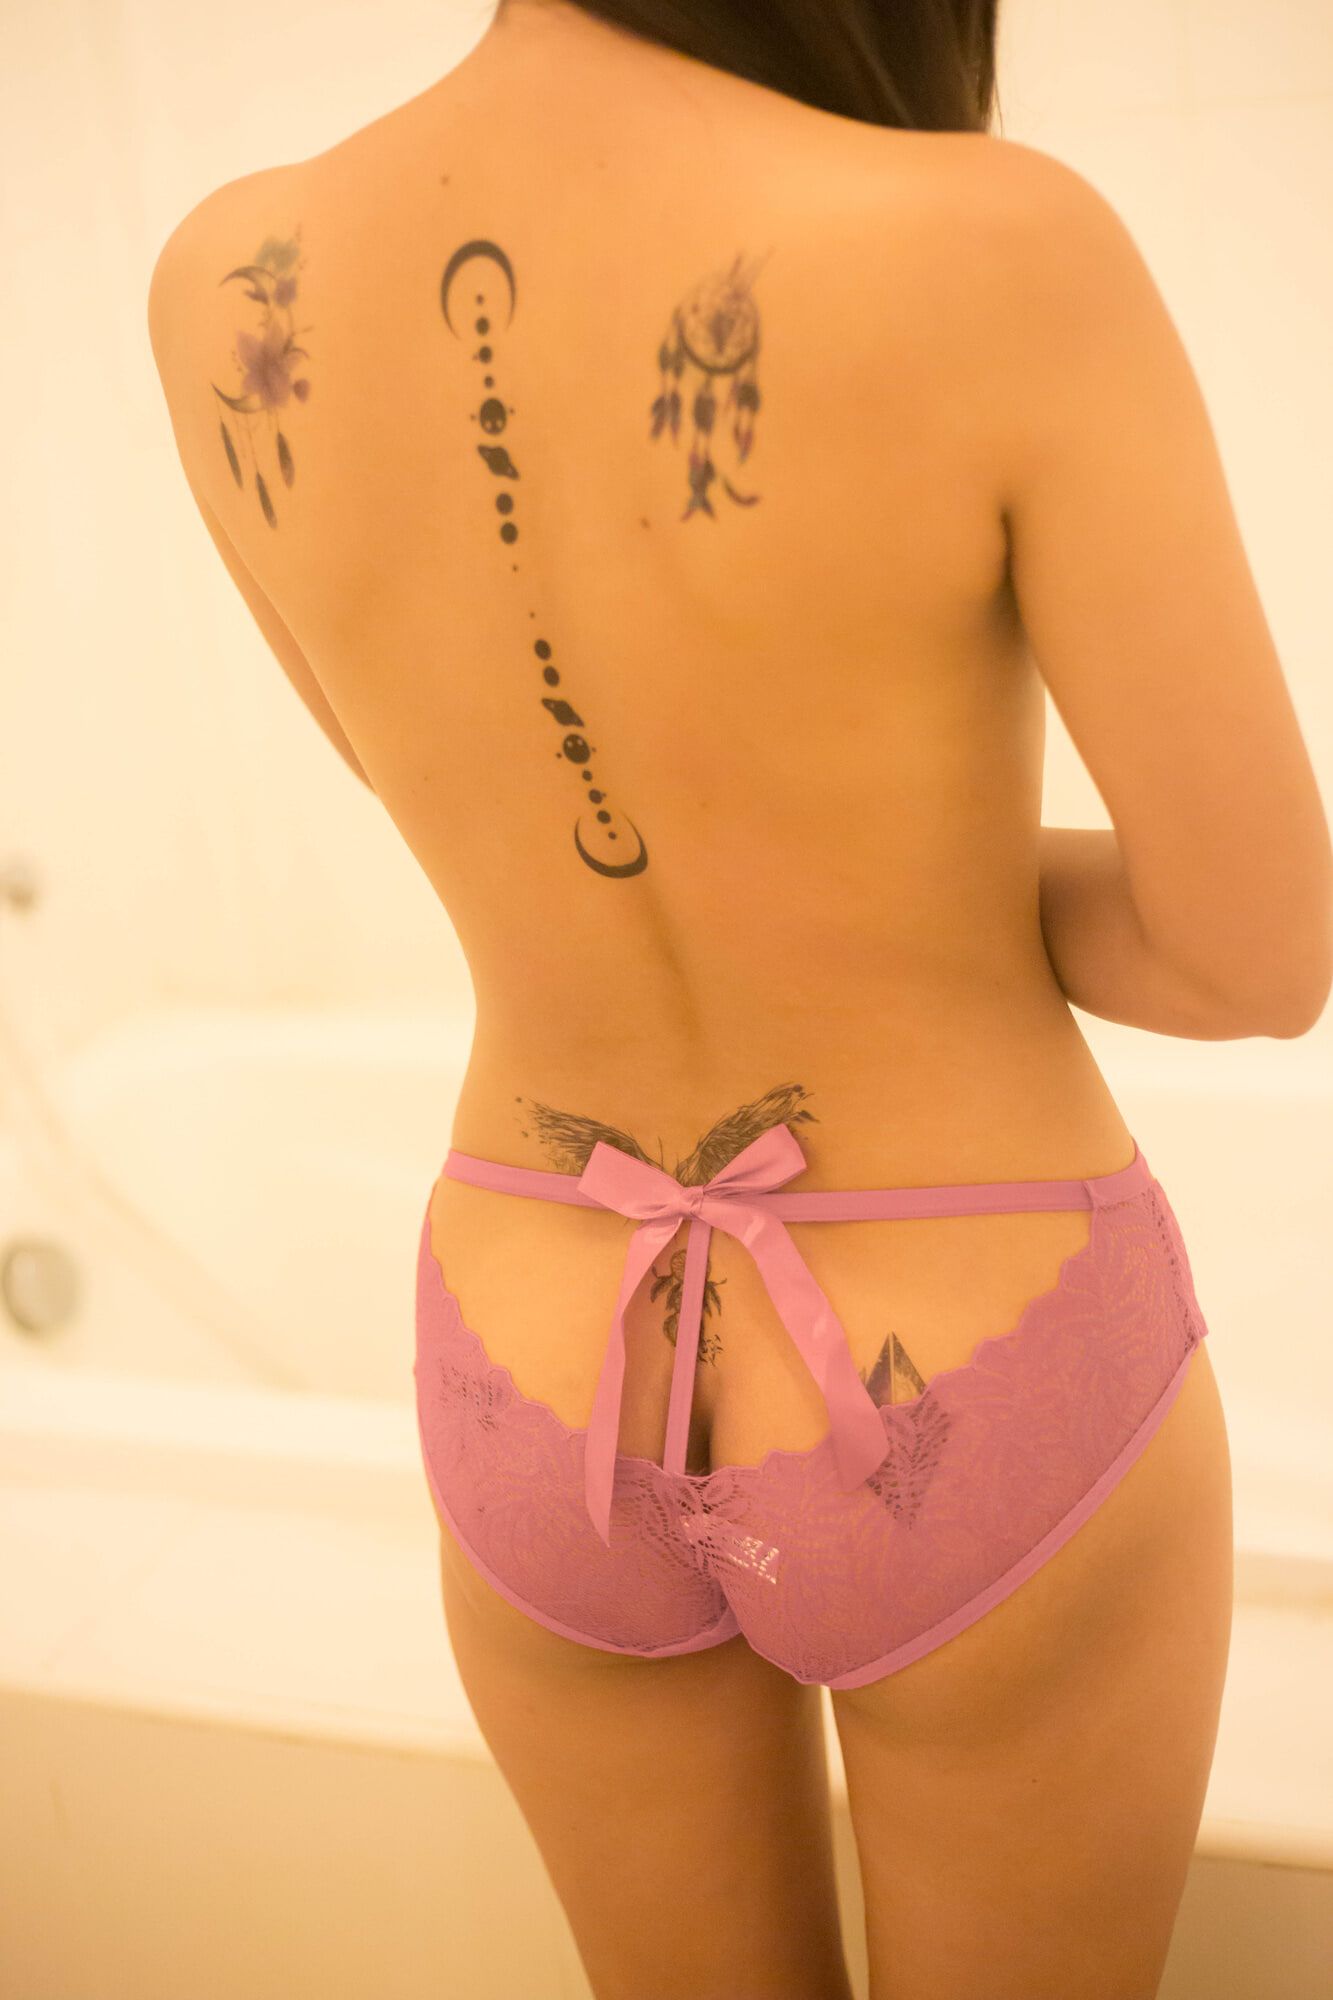 Asian girl and her tattoo in the tub #3